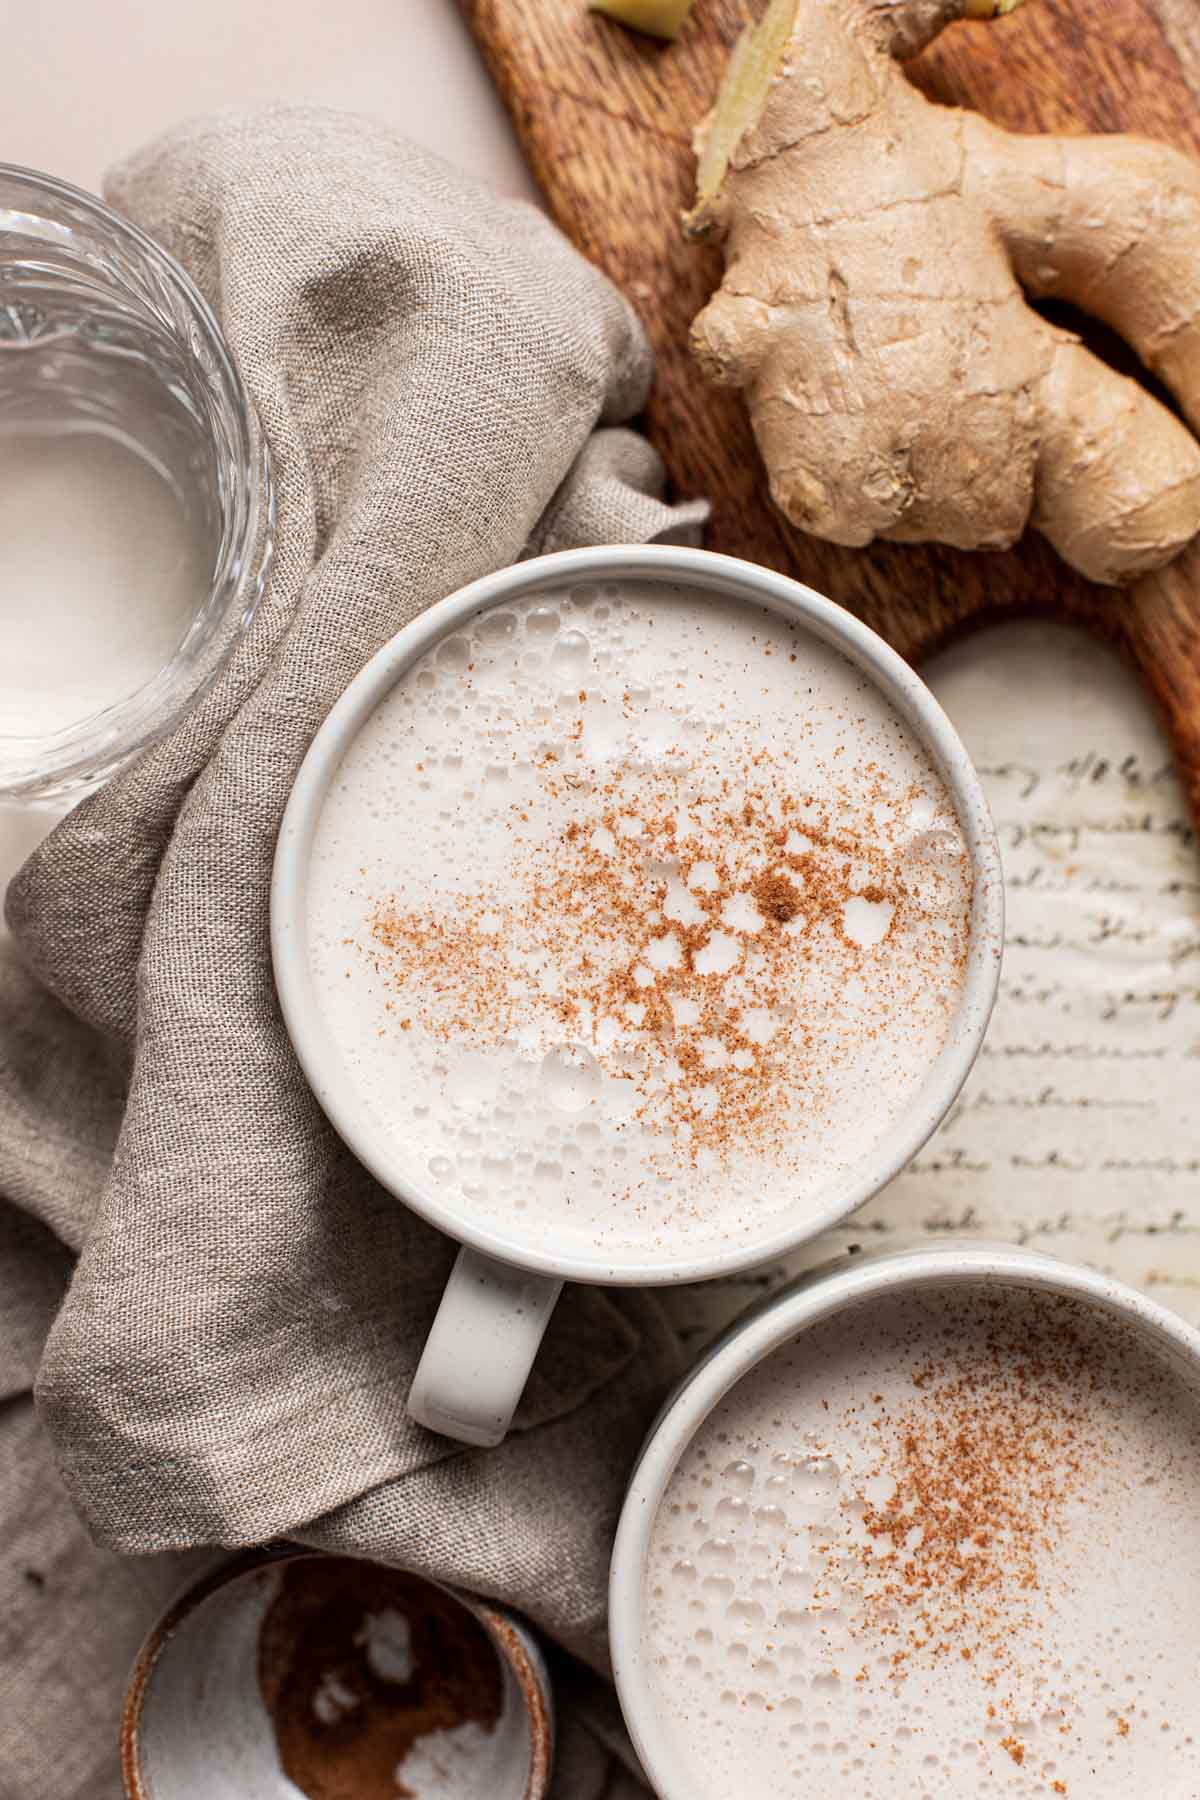 Two mugs containing a frothy milk drink with a ginger root placed next to them.